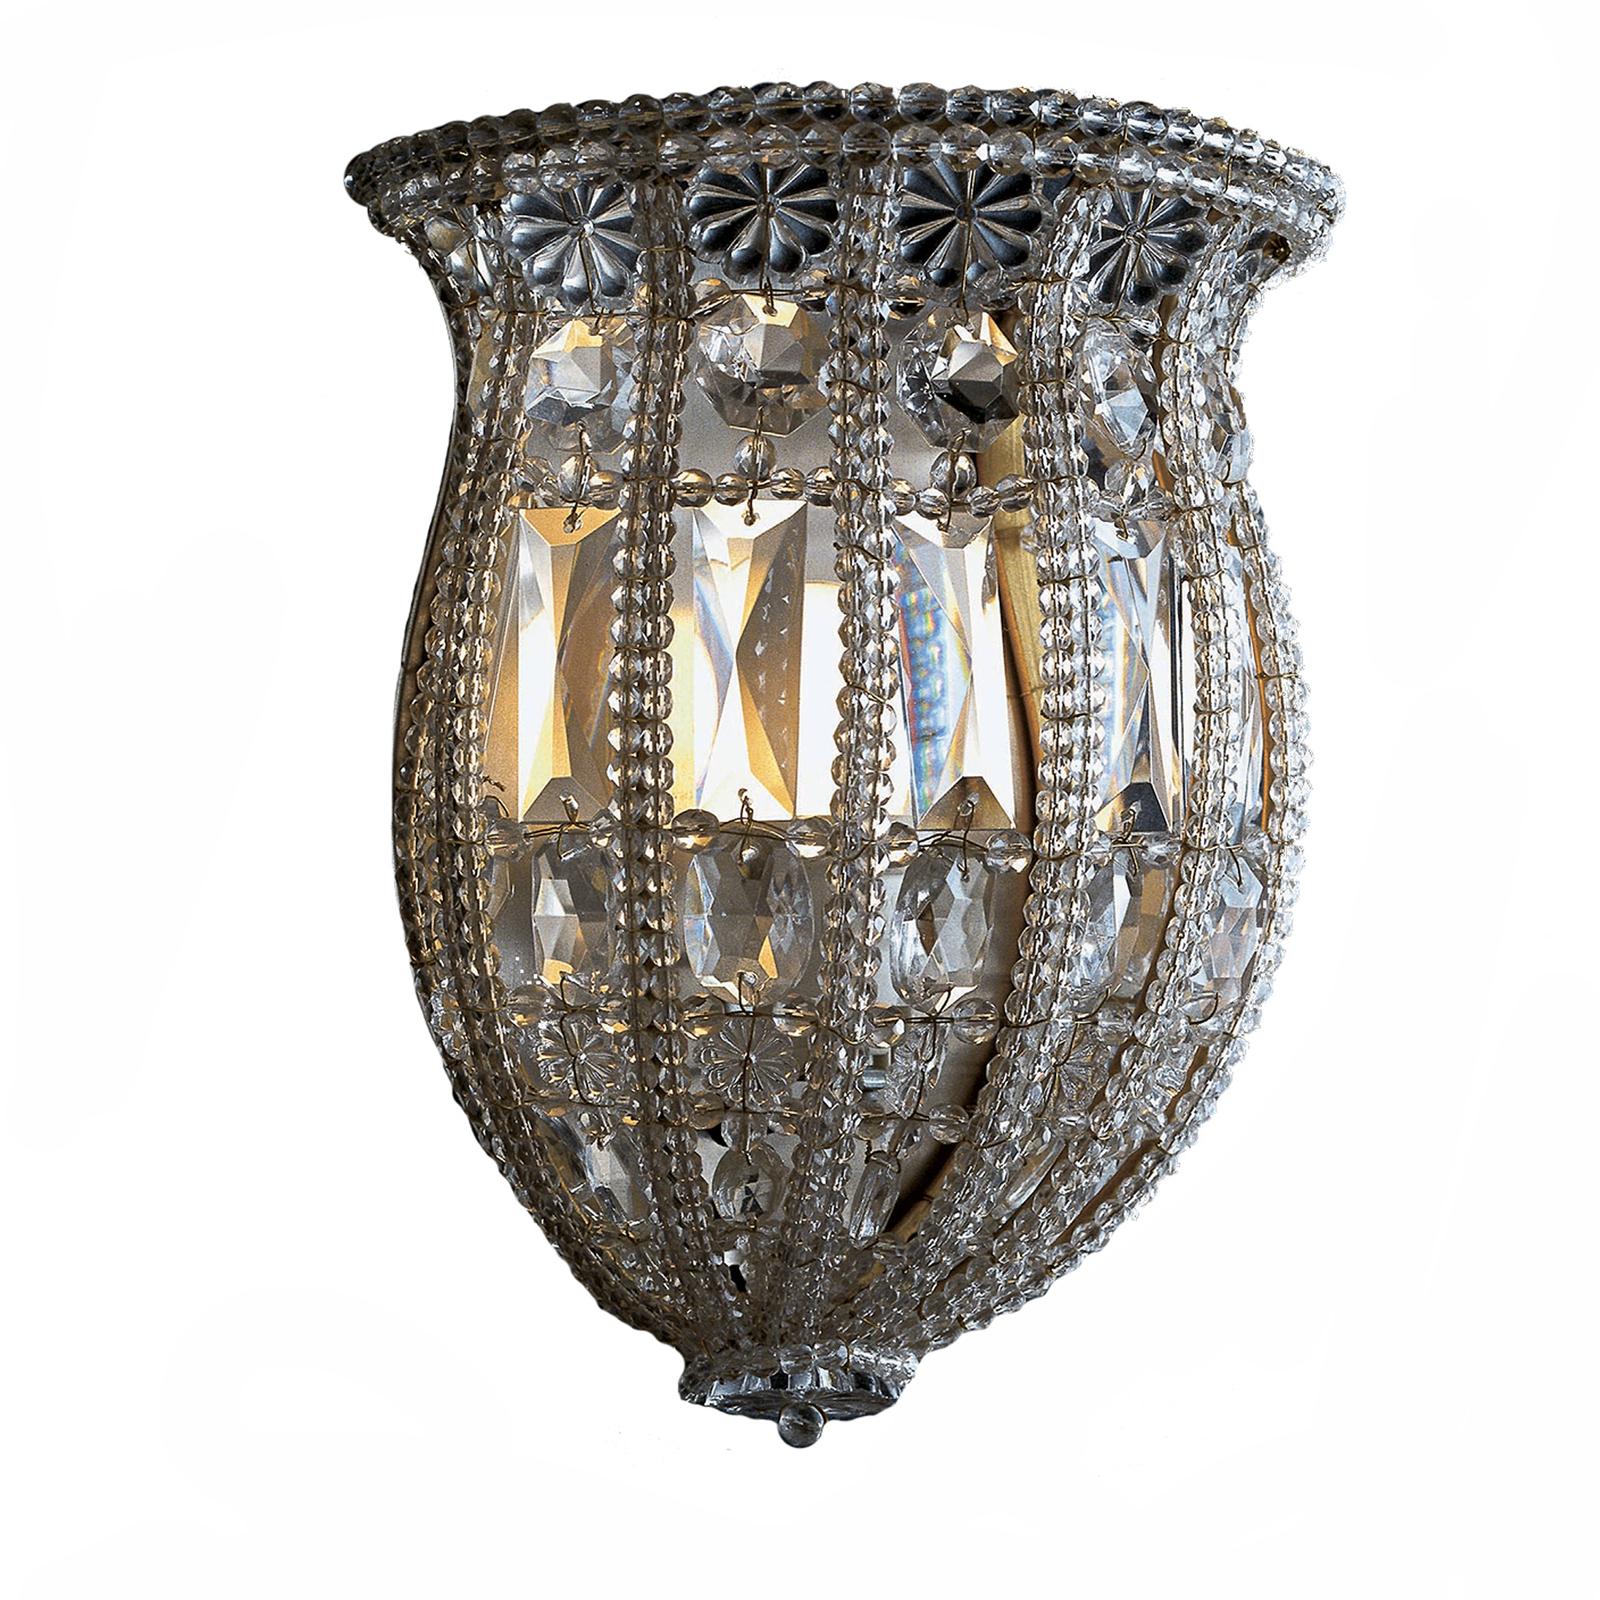 This elegant sconce is an exquisite example of fine, traditional craftsmanship, combined with a sinuous shape that creates a timeless design sure to make a statement in any decor. The structure, opening up at the top like a large-mouthed vase, is